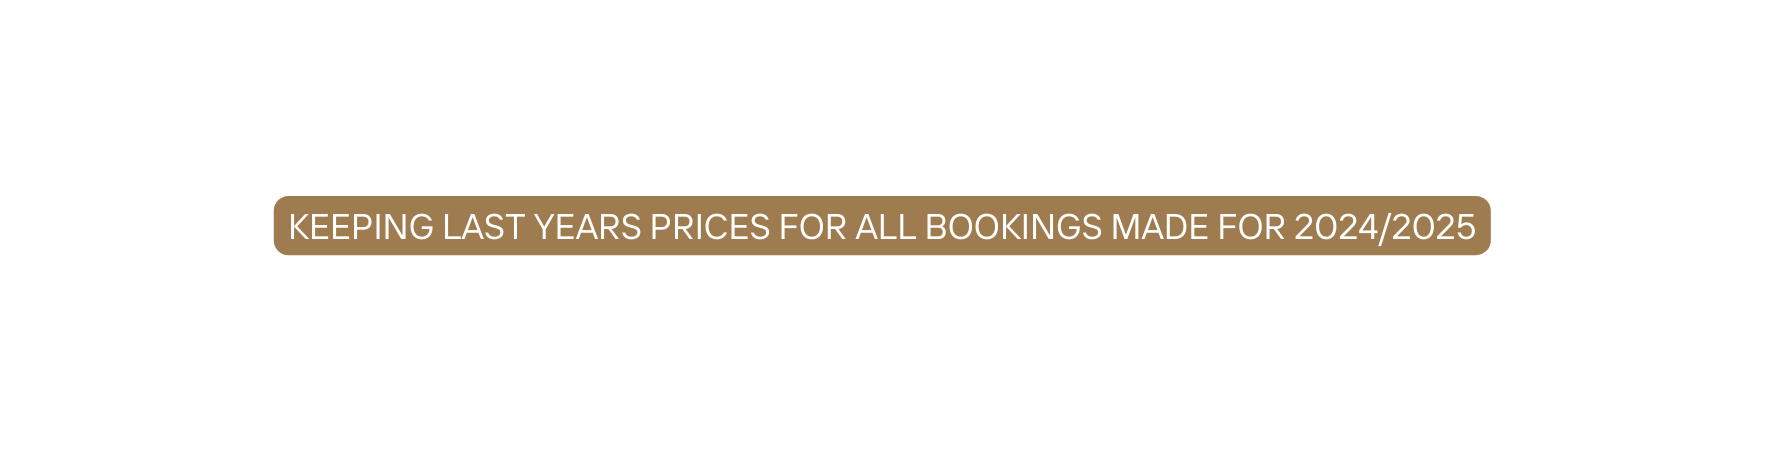 keeping last years prices for all bookings made for 2024 2025